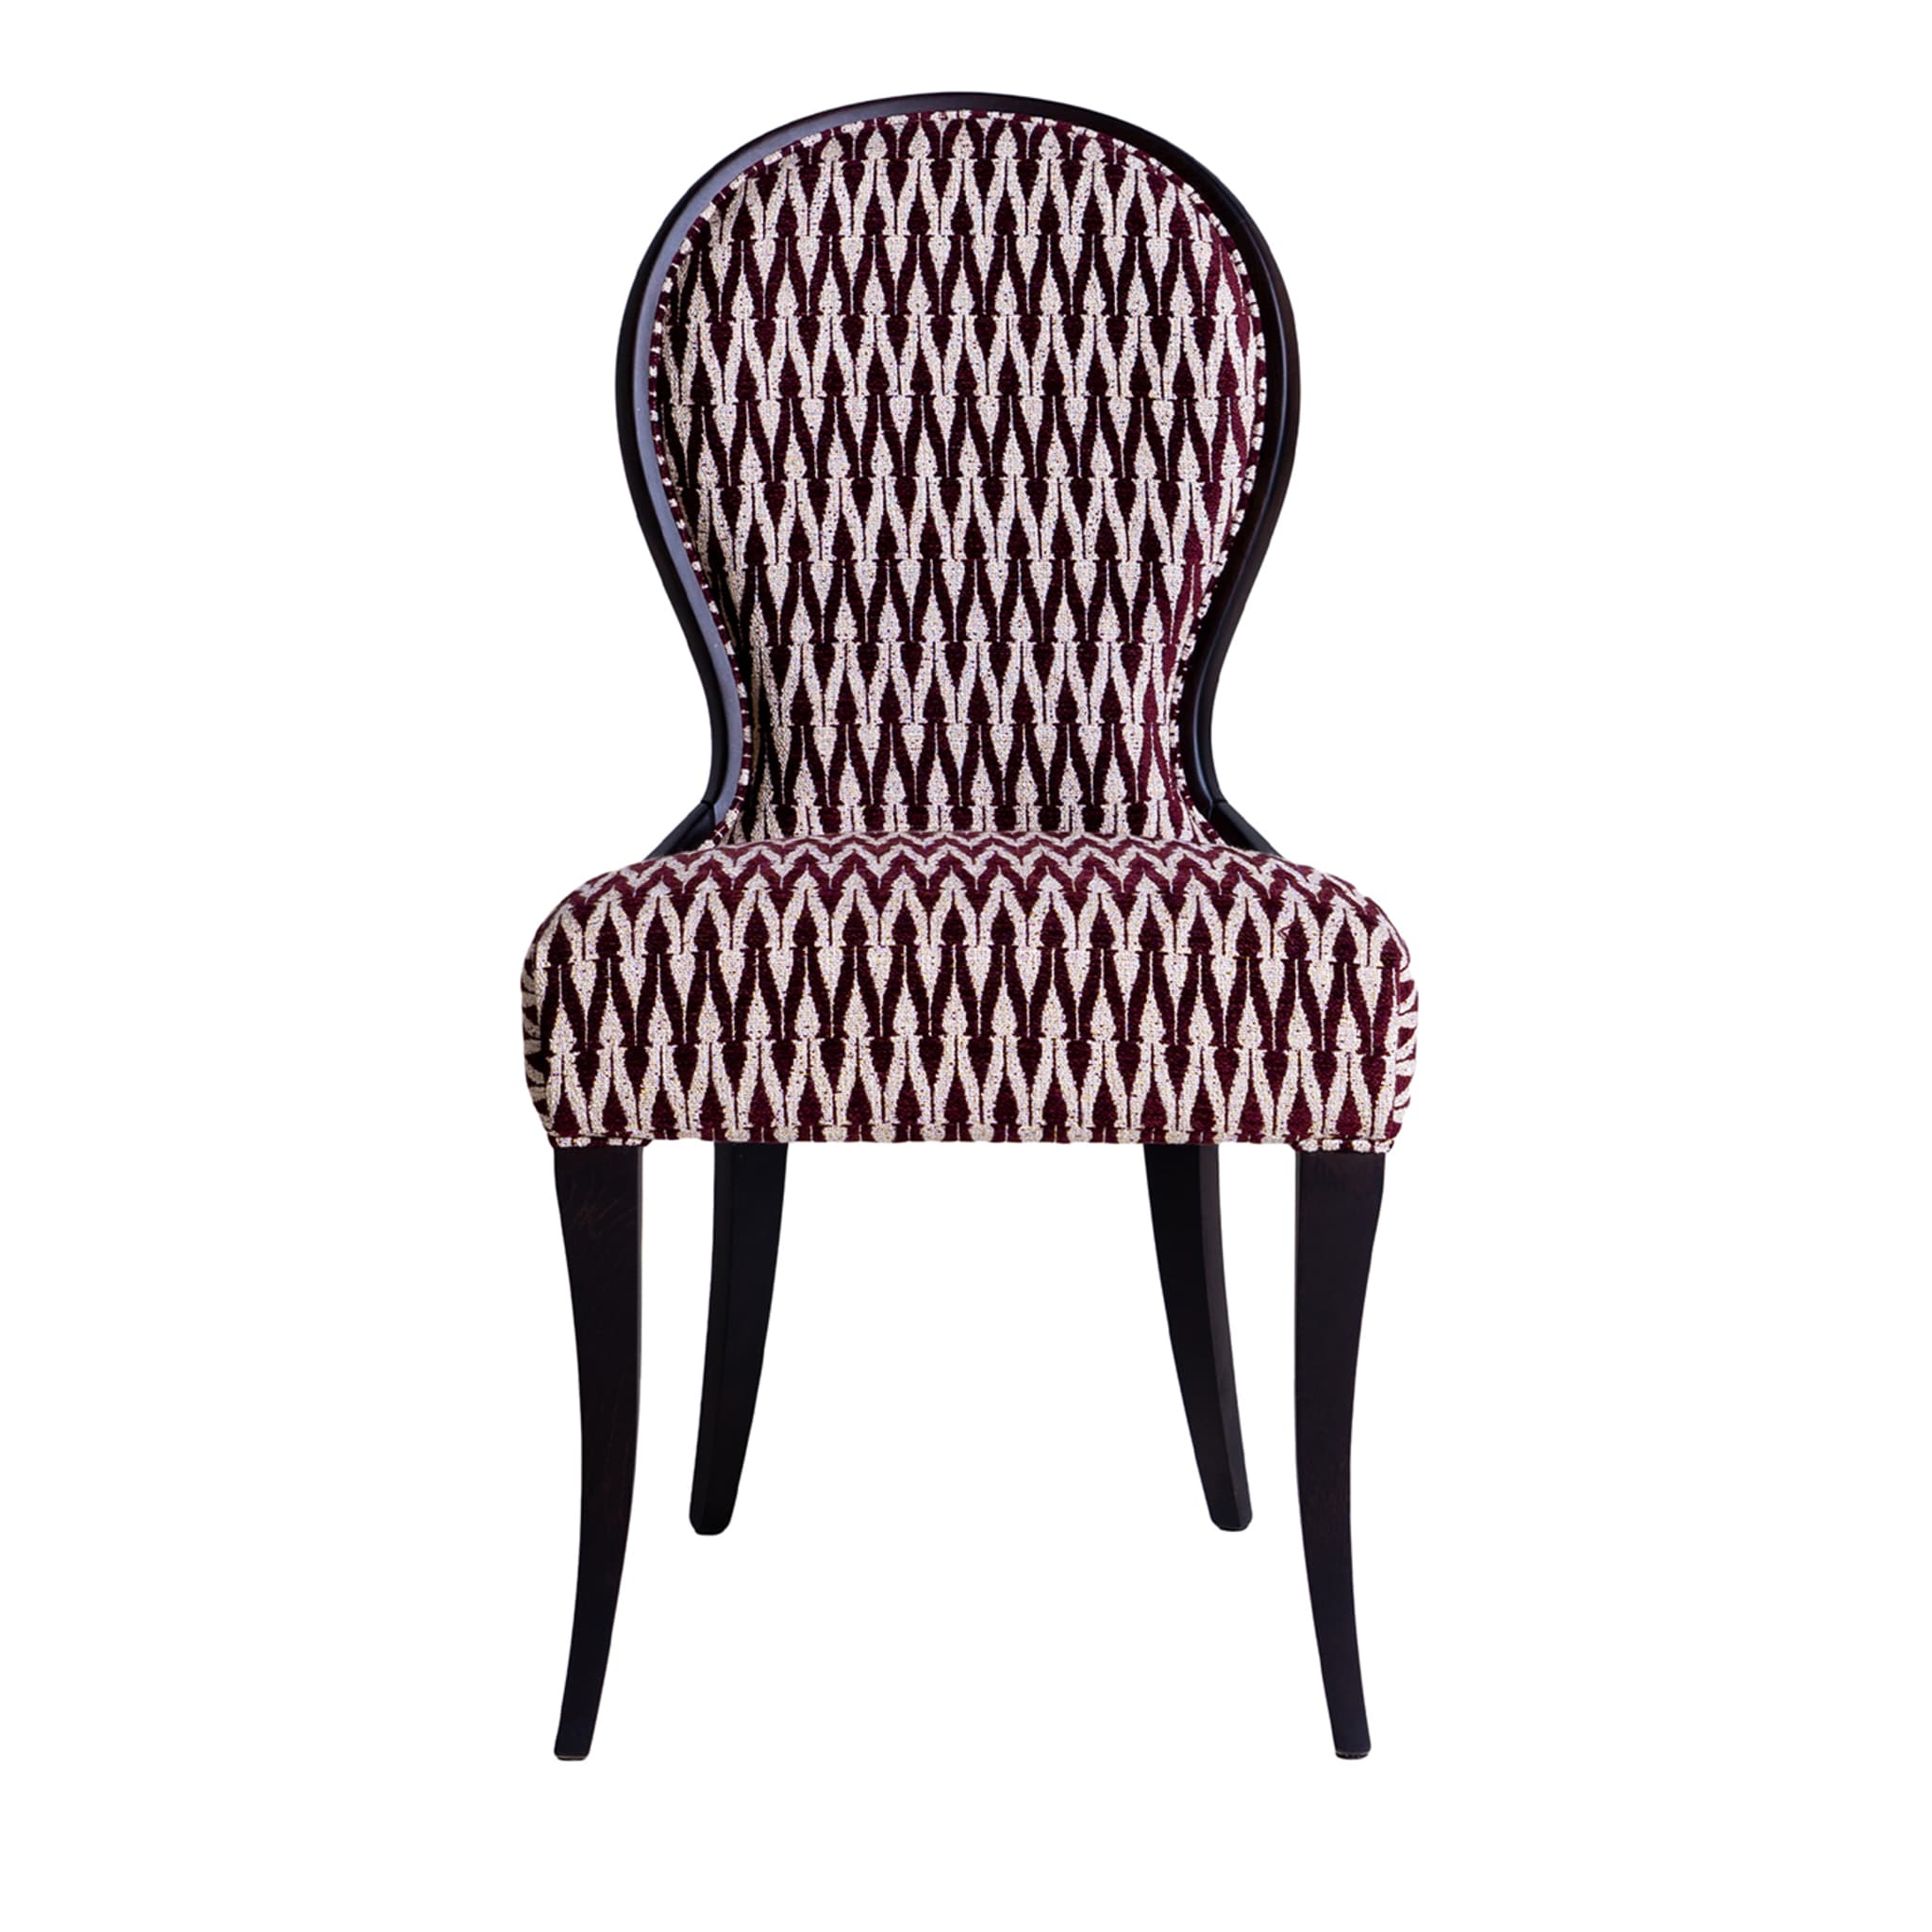 Gong Patterned Chair  - Main view